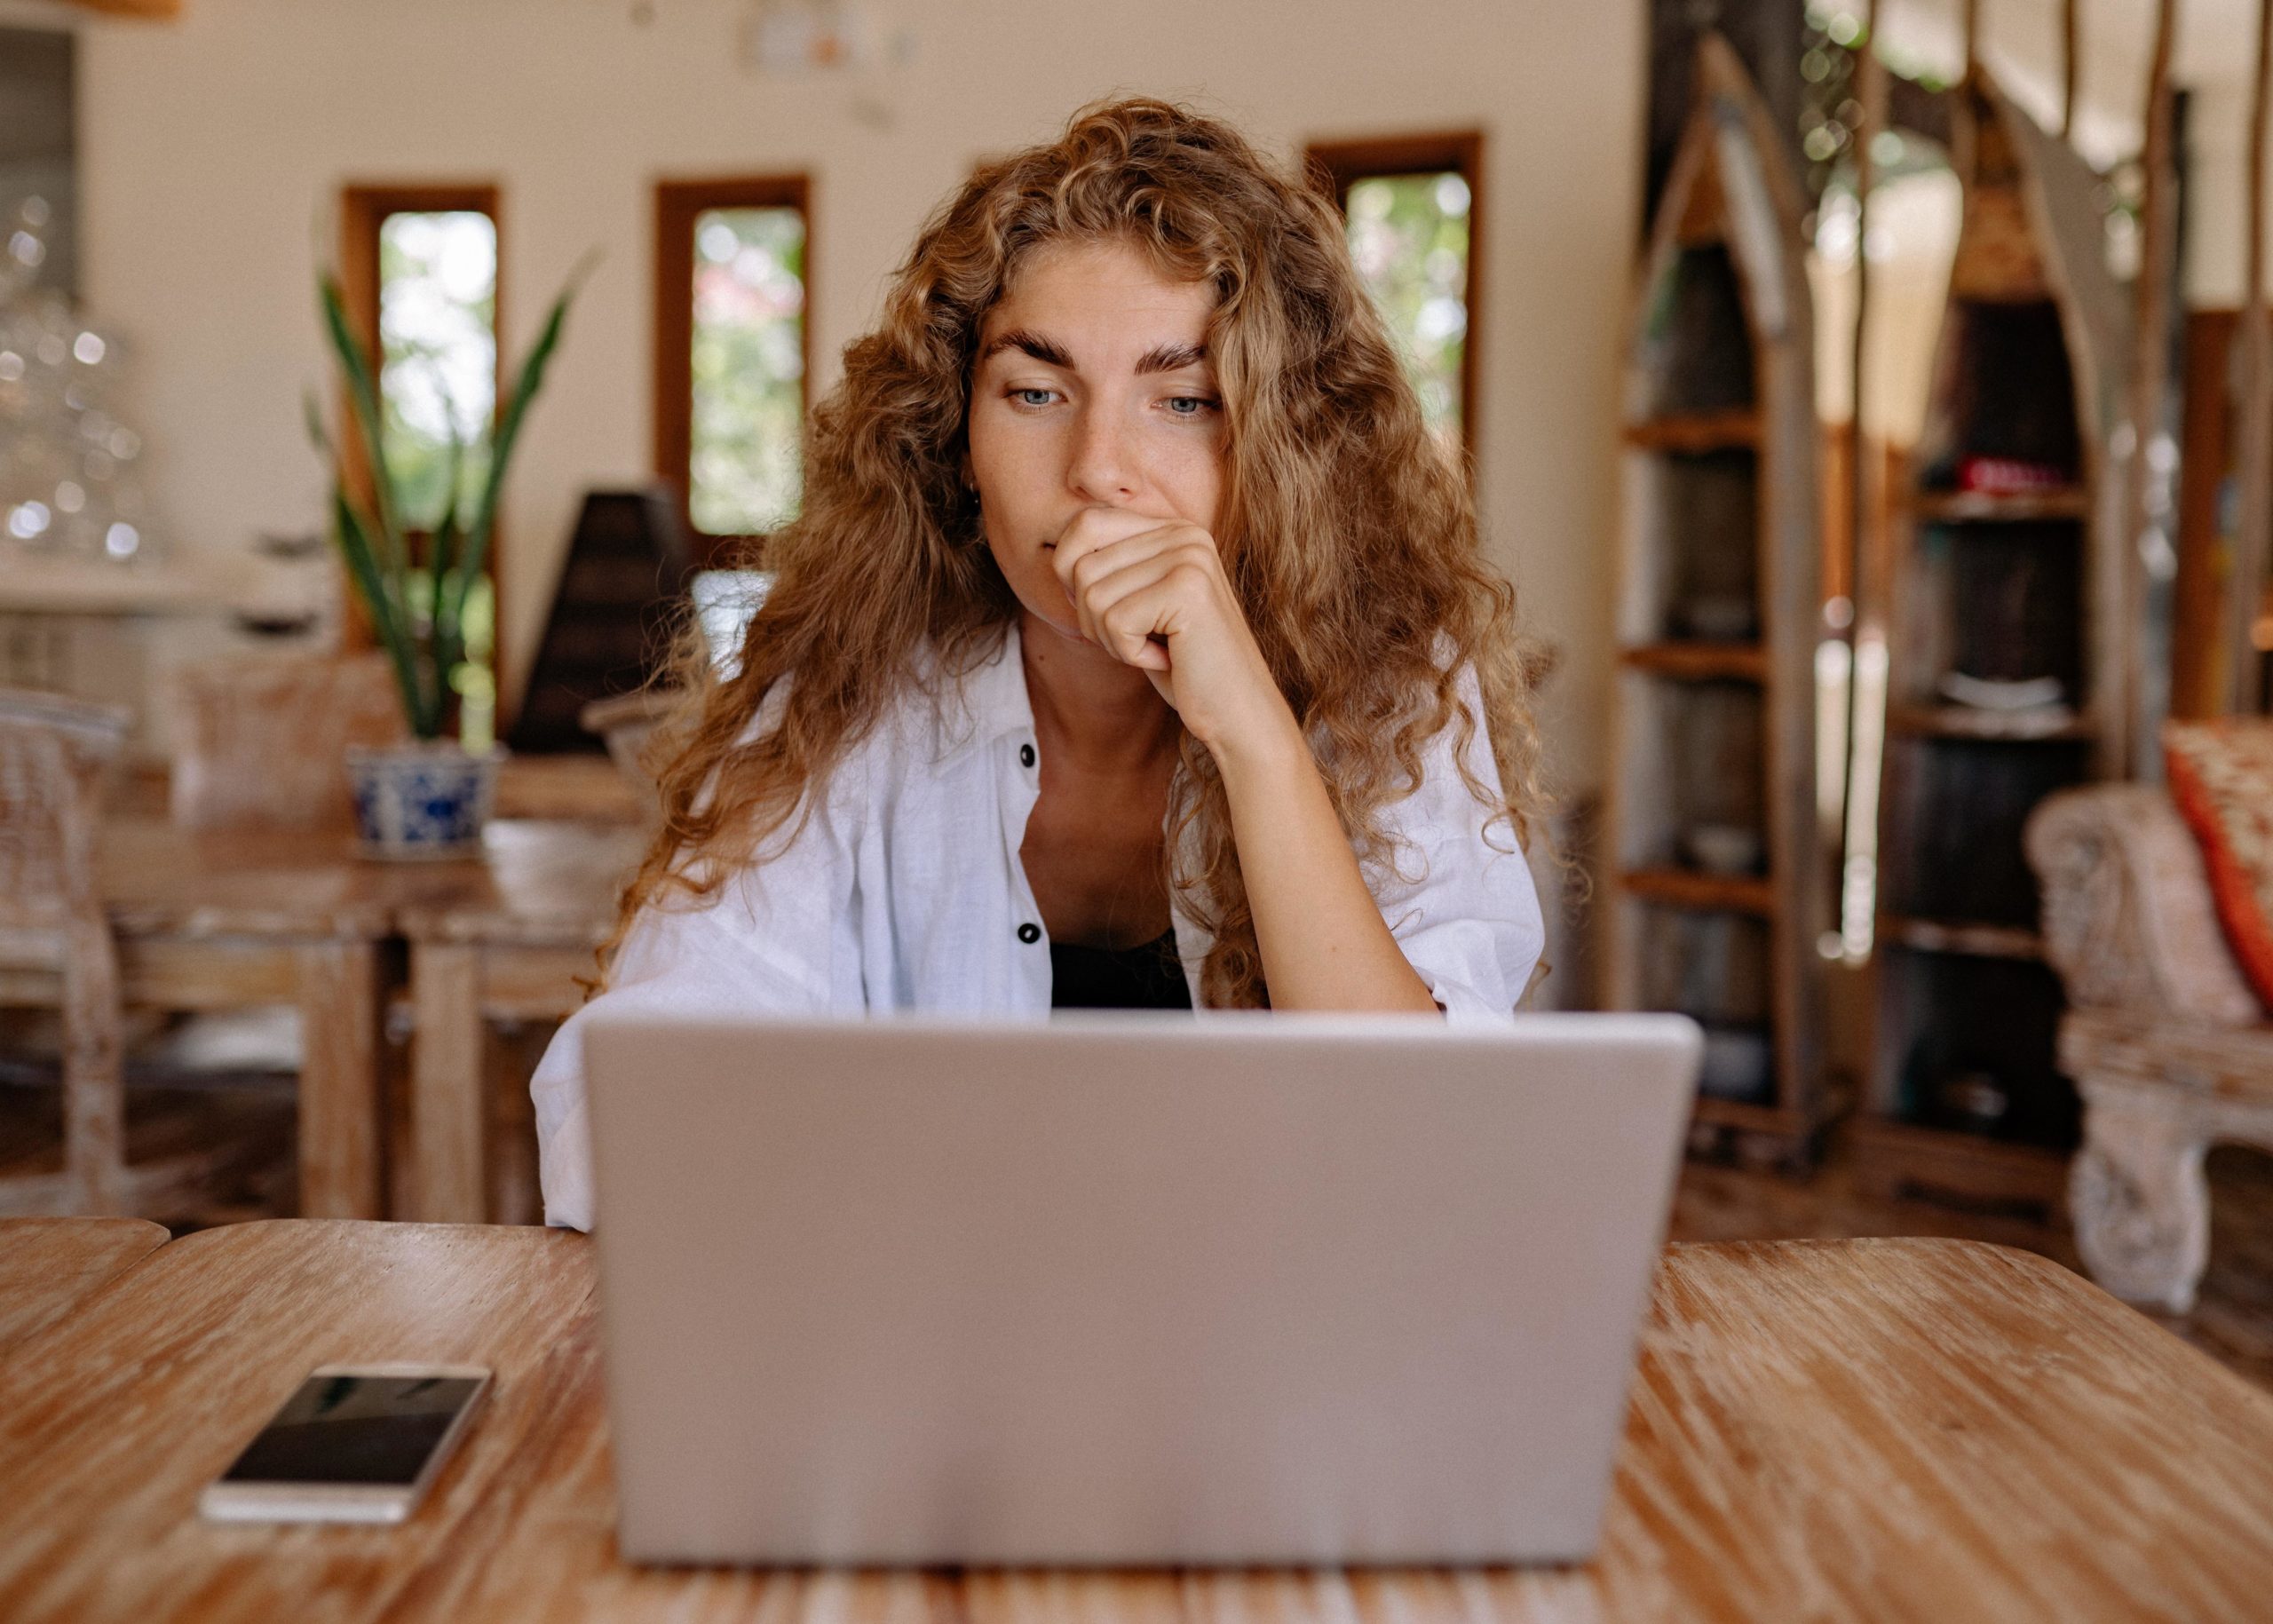 Person looking at their computer contemplating what social media platform they should prioritize for their business.